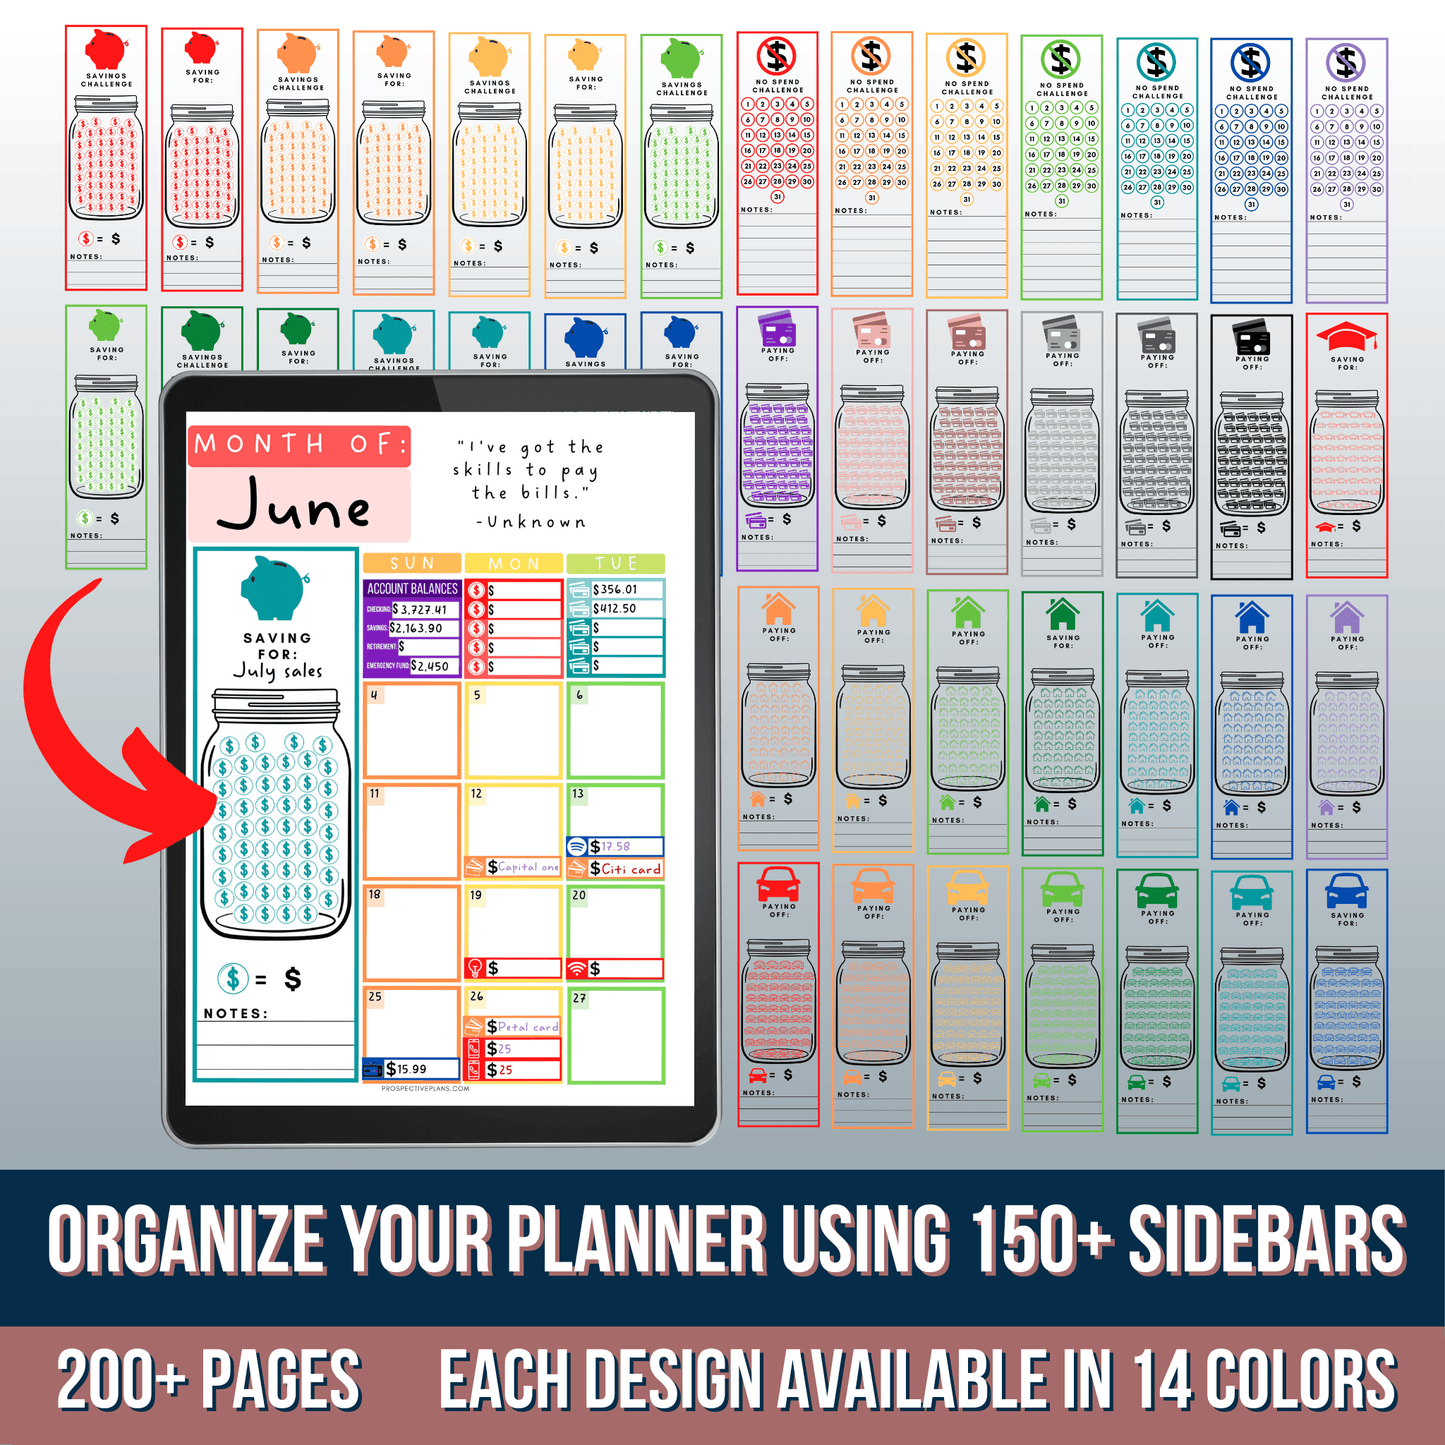 2024 Every Penny Counts - Budget Planner Bundle | 1000+ Stickers